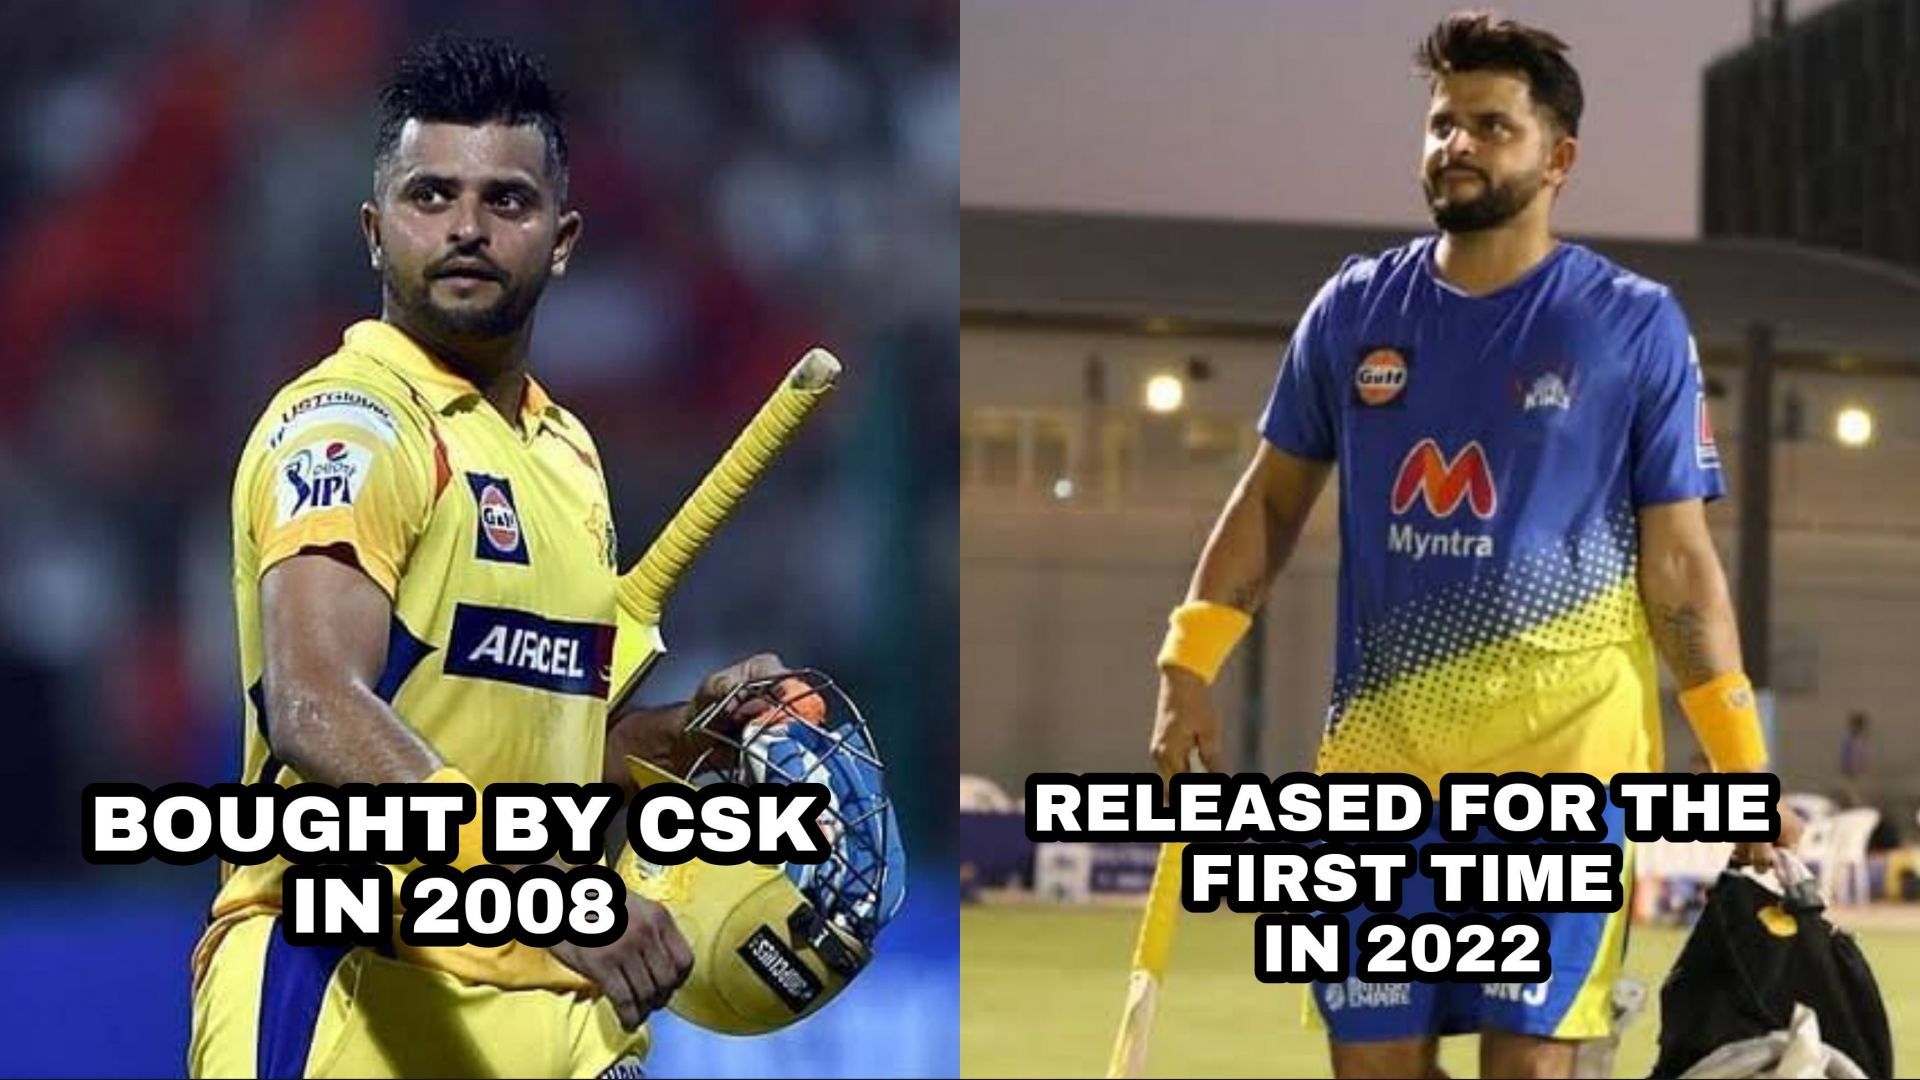 Suresh Raina has been released by the Chennai Super Kings for the first time ever before IPL Auction 2022